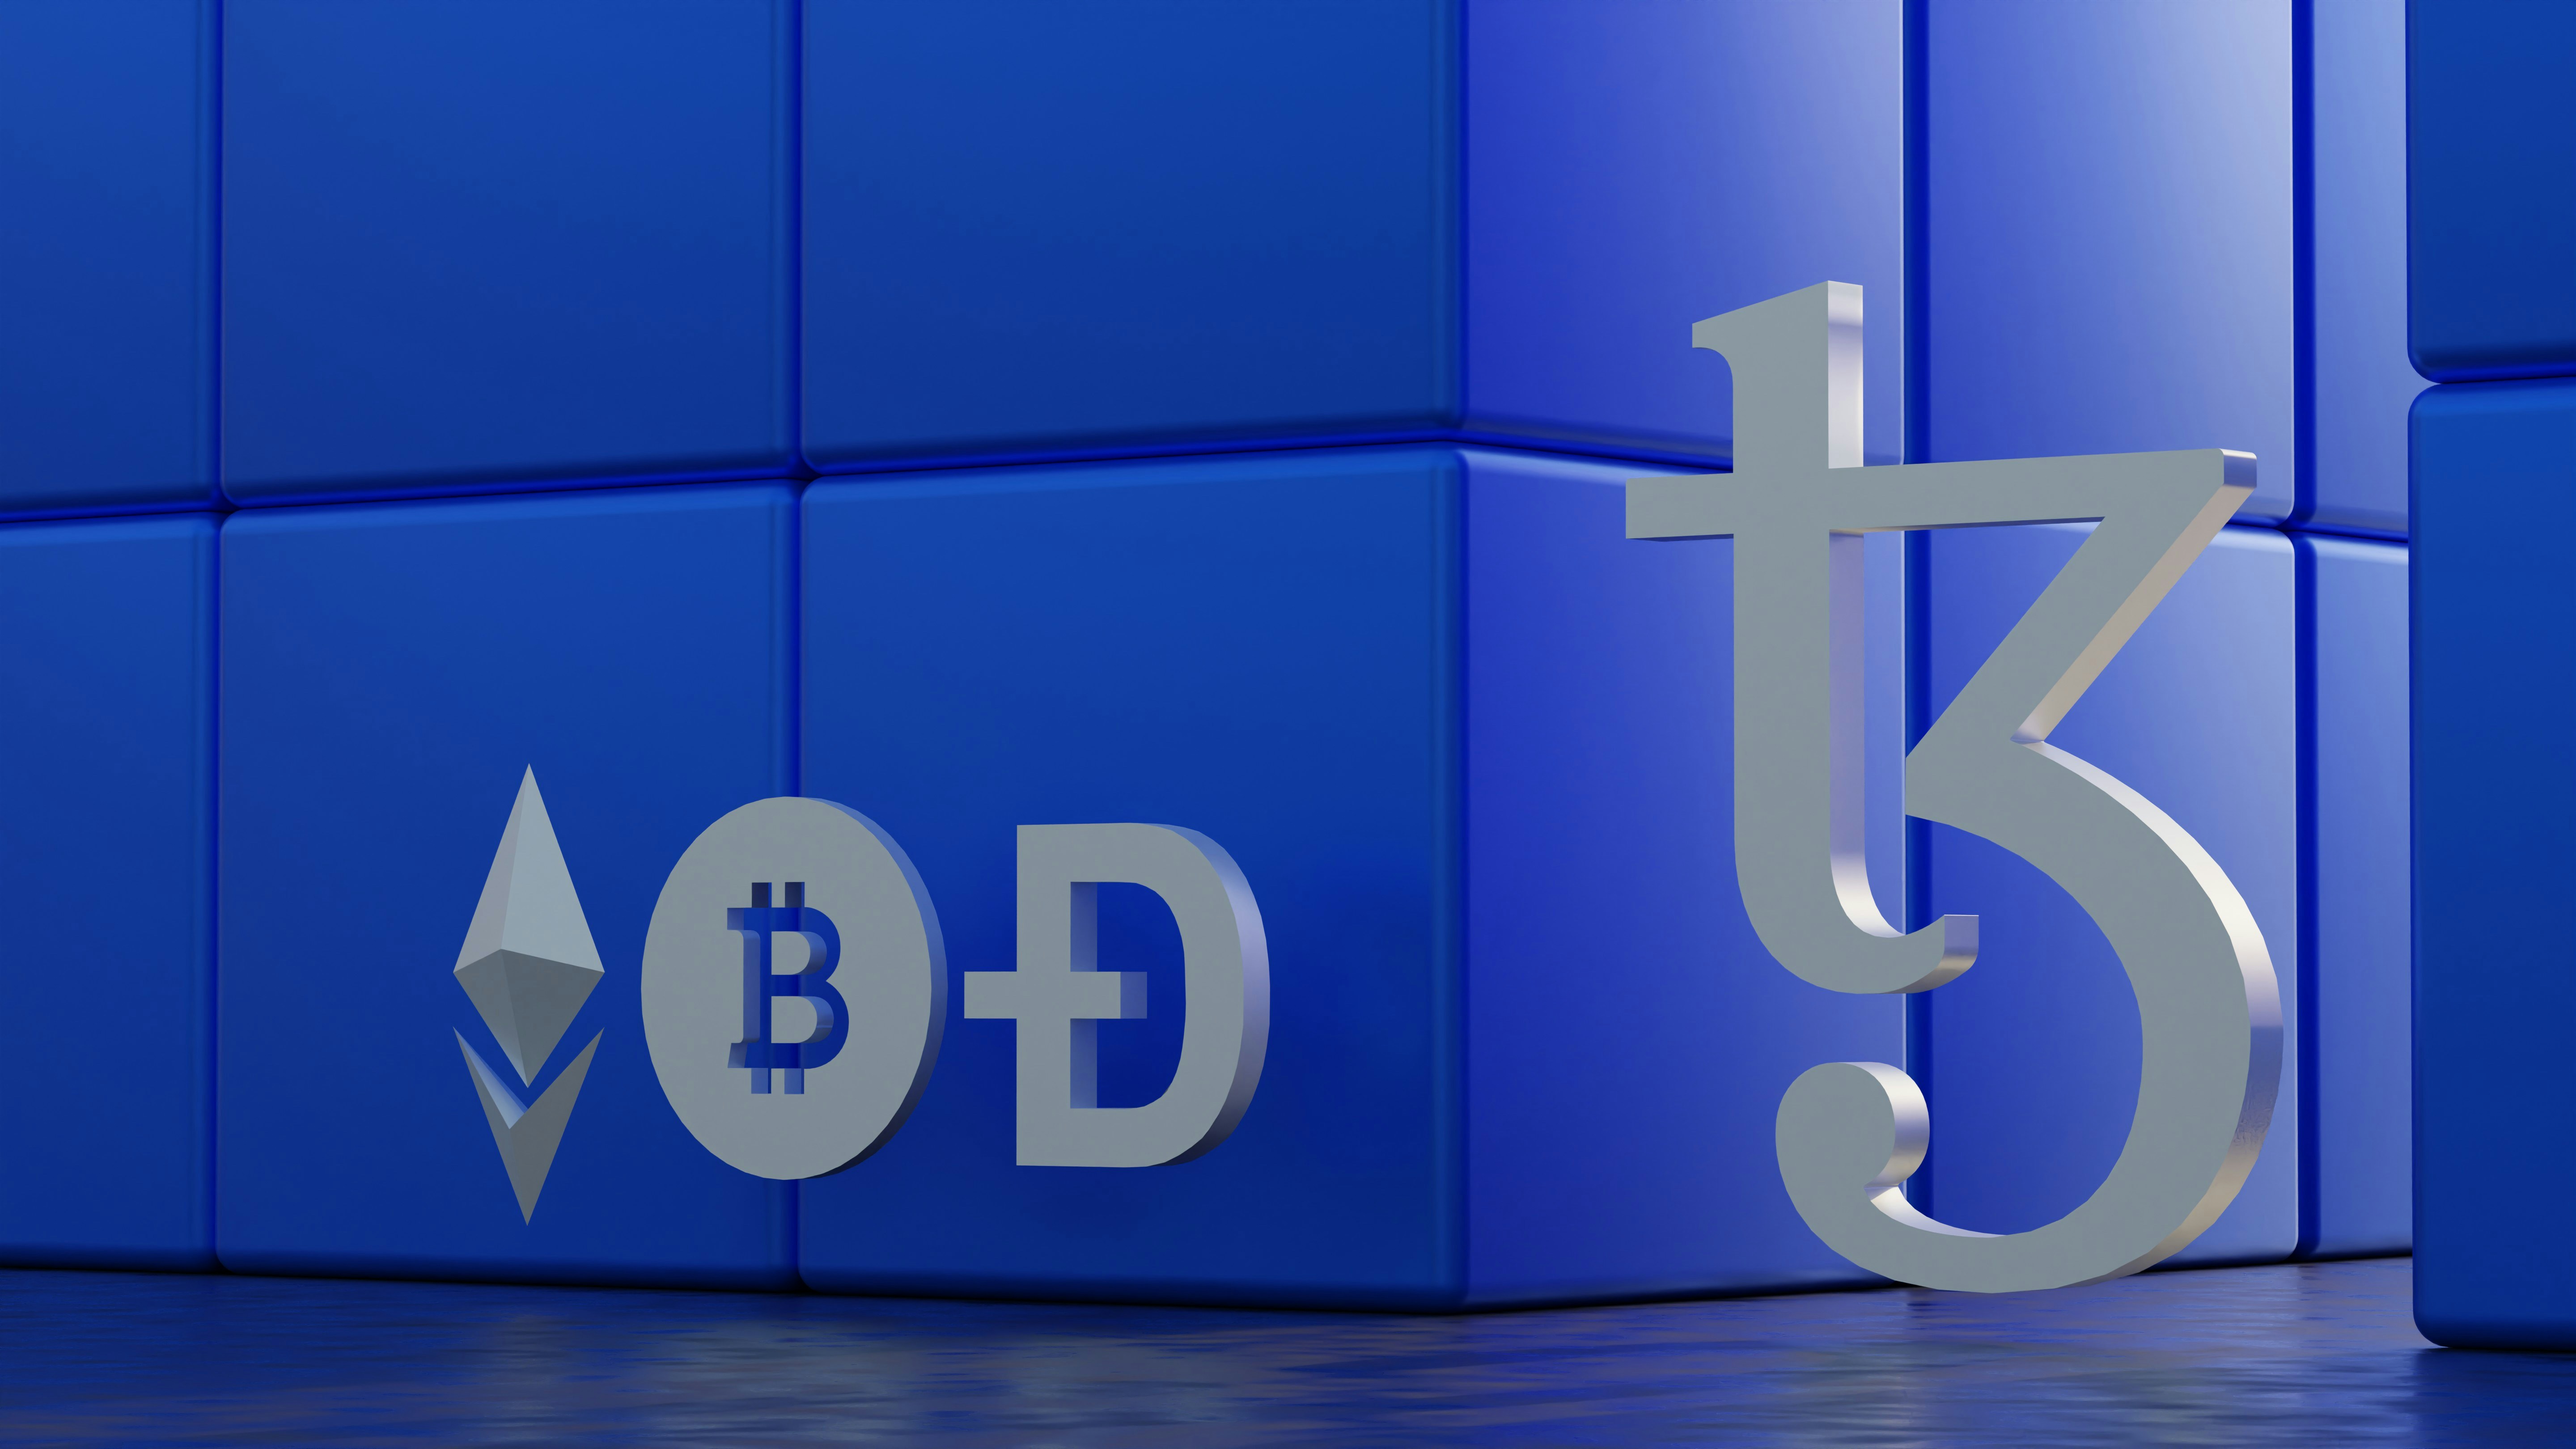 3D illustration of Tezos coin, bitcoin, Ehtereum, and dogecoin floating around blue blocks. Tezos is a blockchain designed to evolve. work 👇: Email: shubhamdhage000@gmail.com